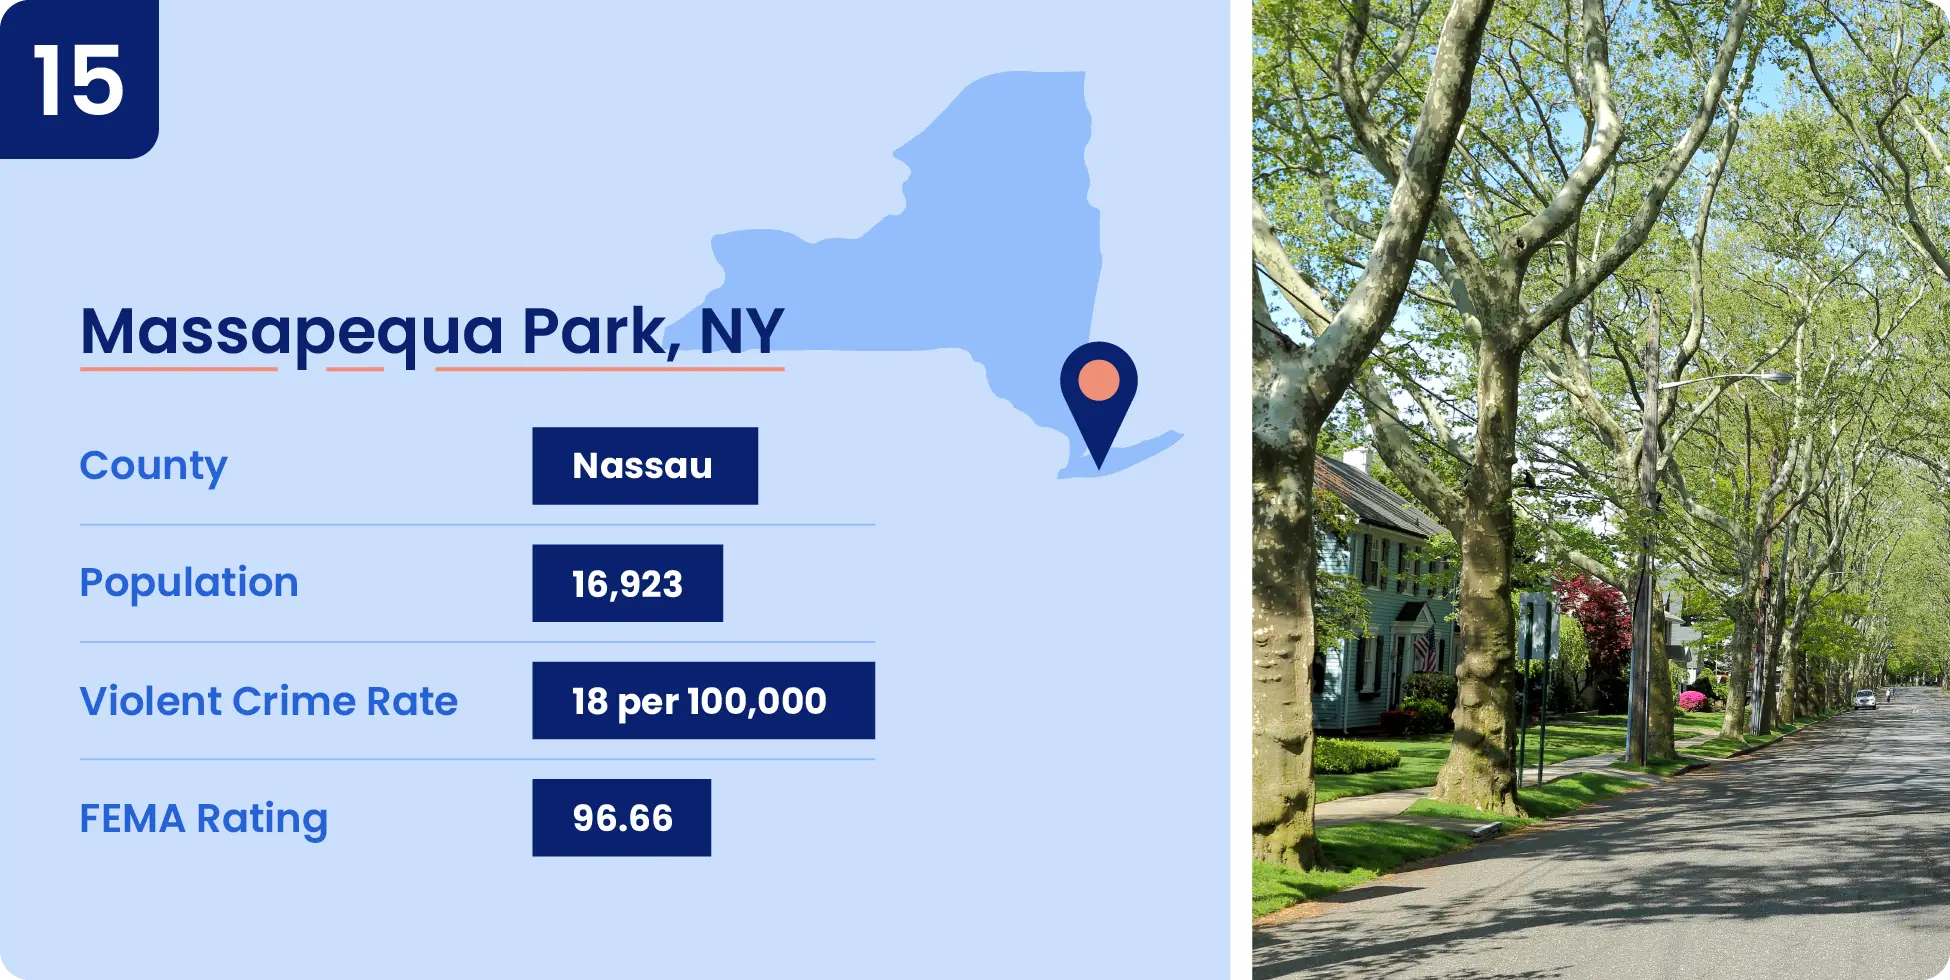 Image shows key data about one of the safest cities in New York, Massapequa Park.